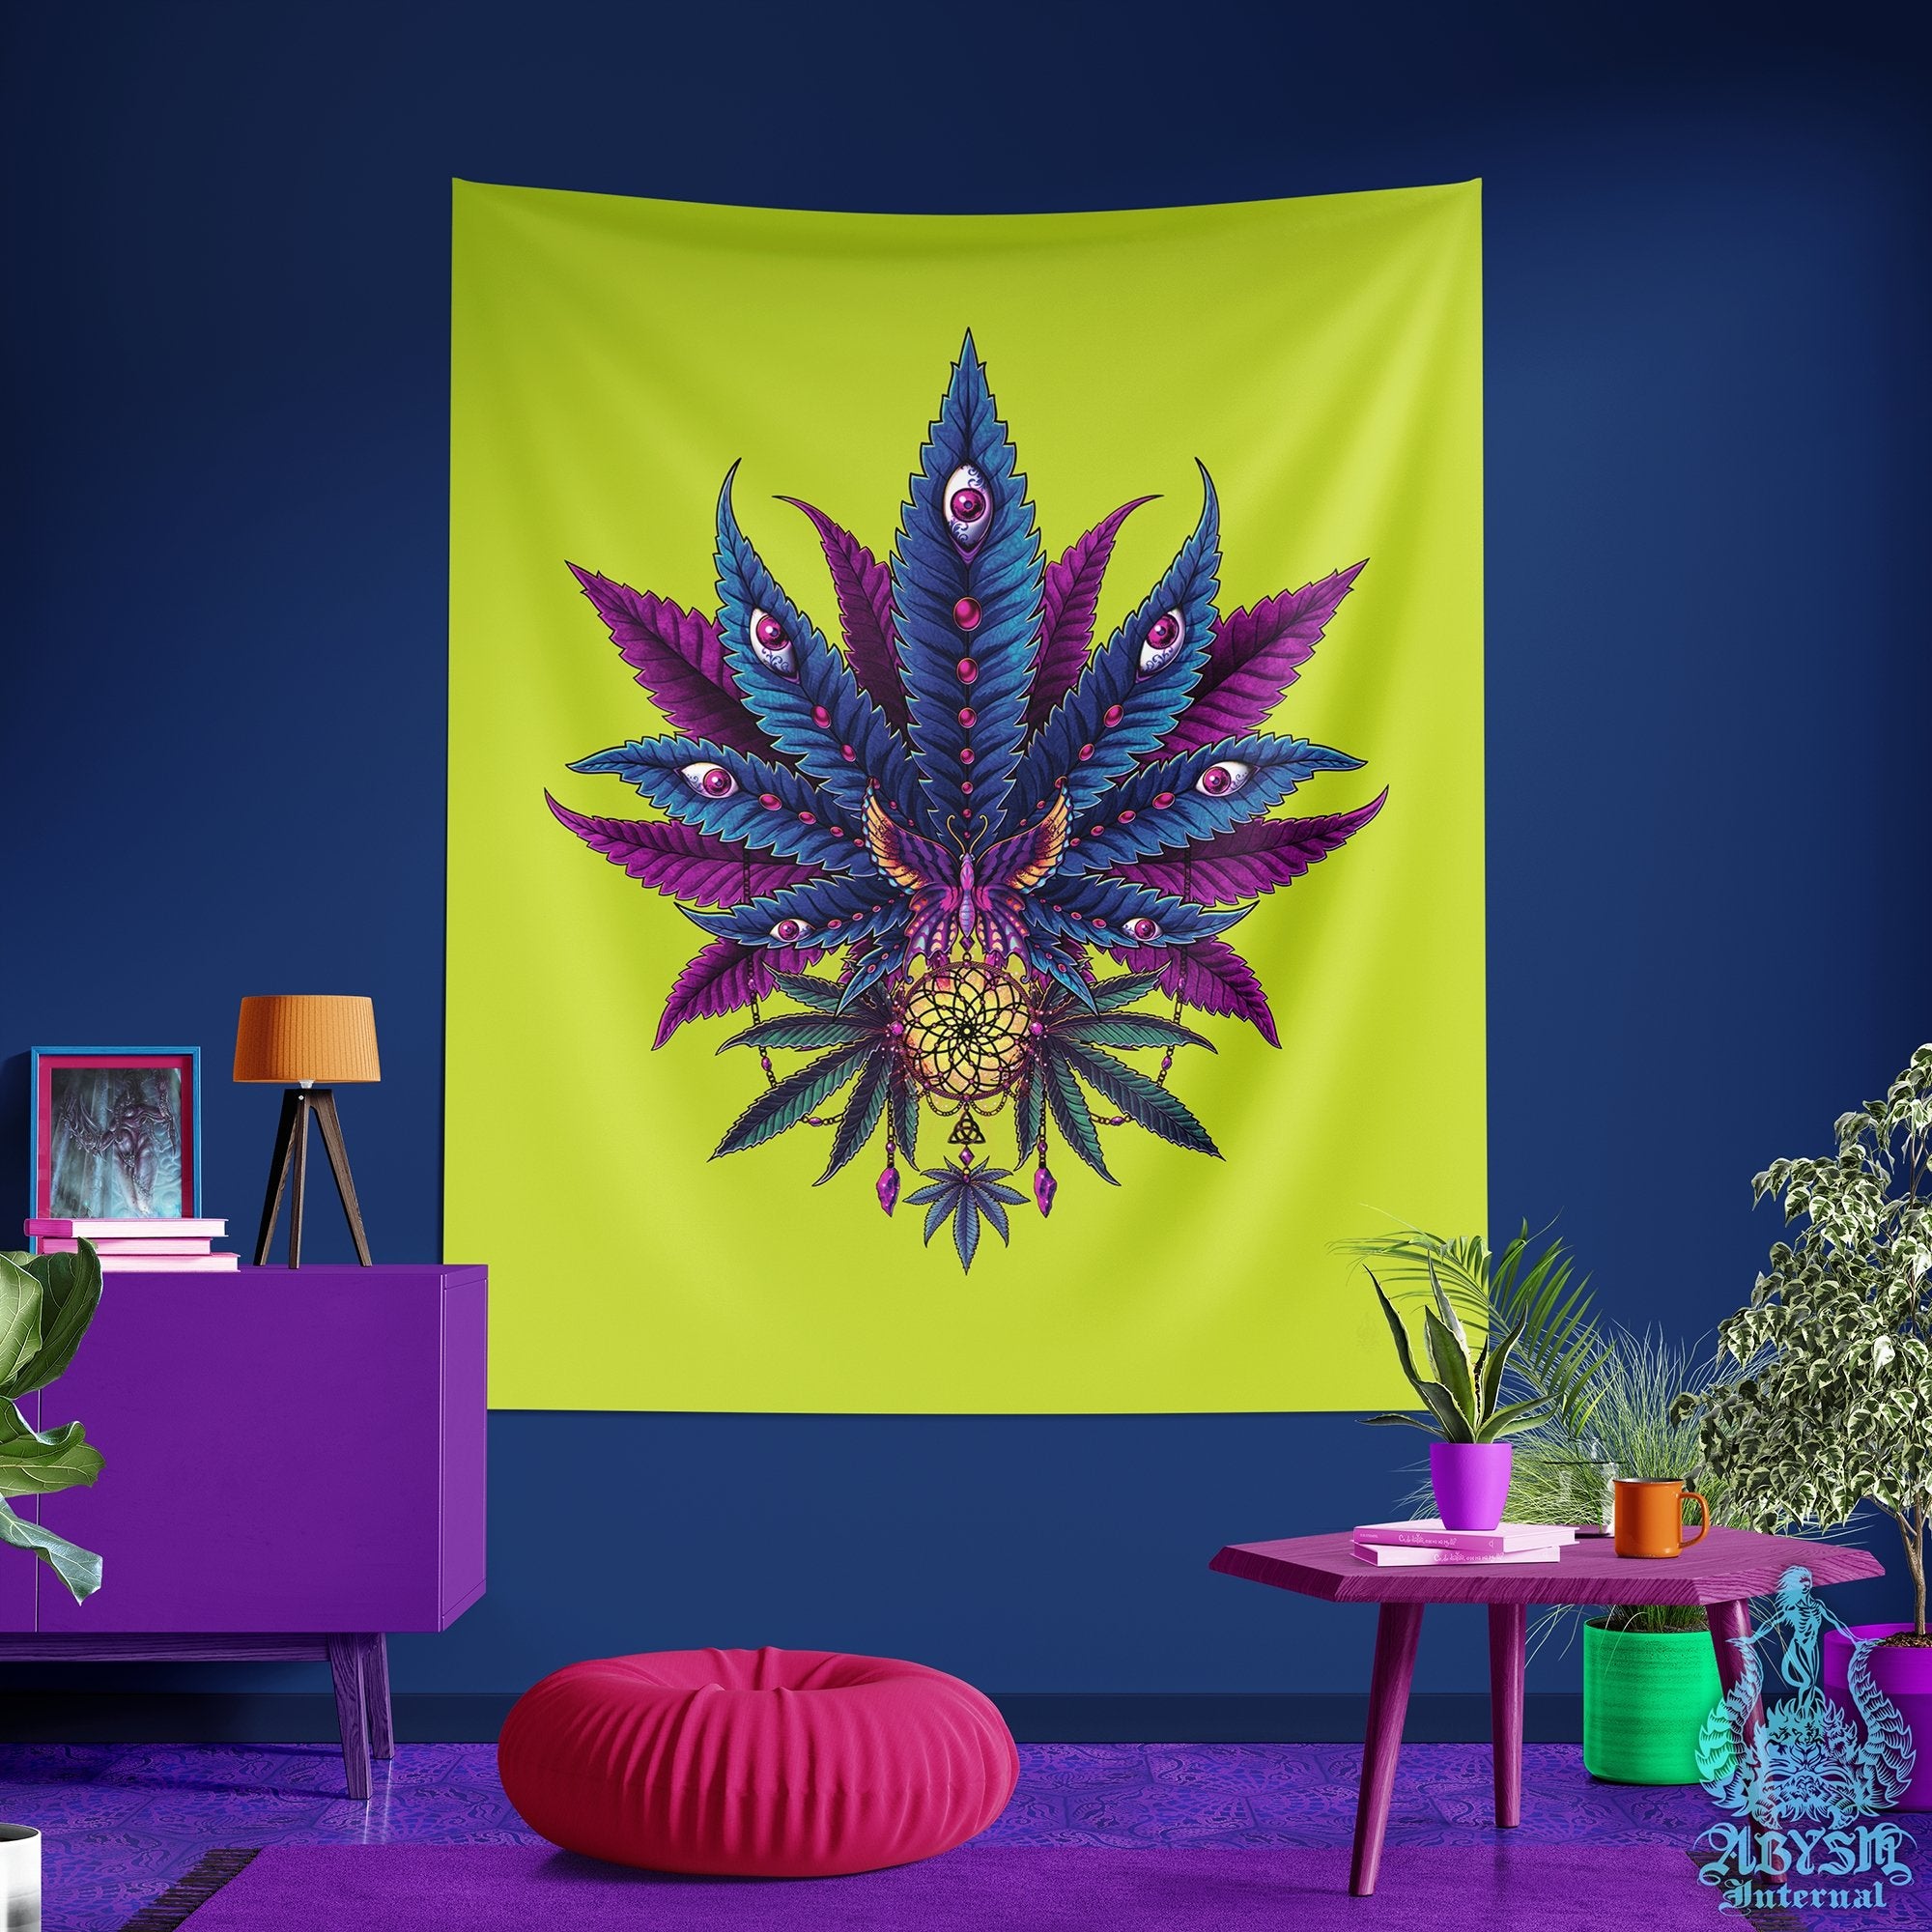 Weed Tapestry, Synthwave Cannabis Shop Decor, 420 Wall Hanging, Retrowave 80s Home Decor, Vaporwave Art Print, Eclectic and Funky Marijuana - Neon II - Abysm Internal